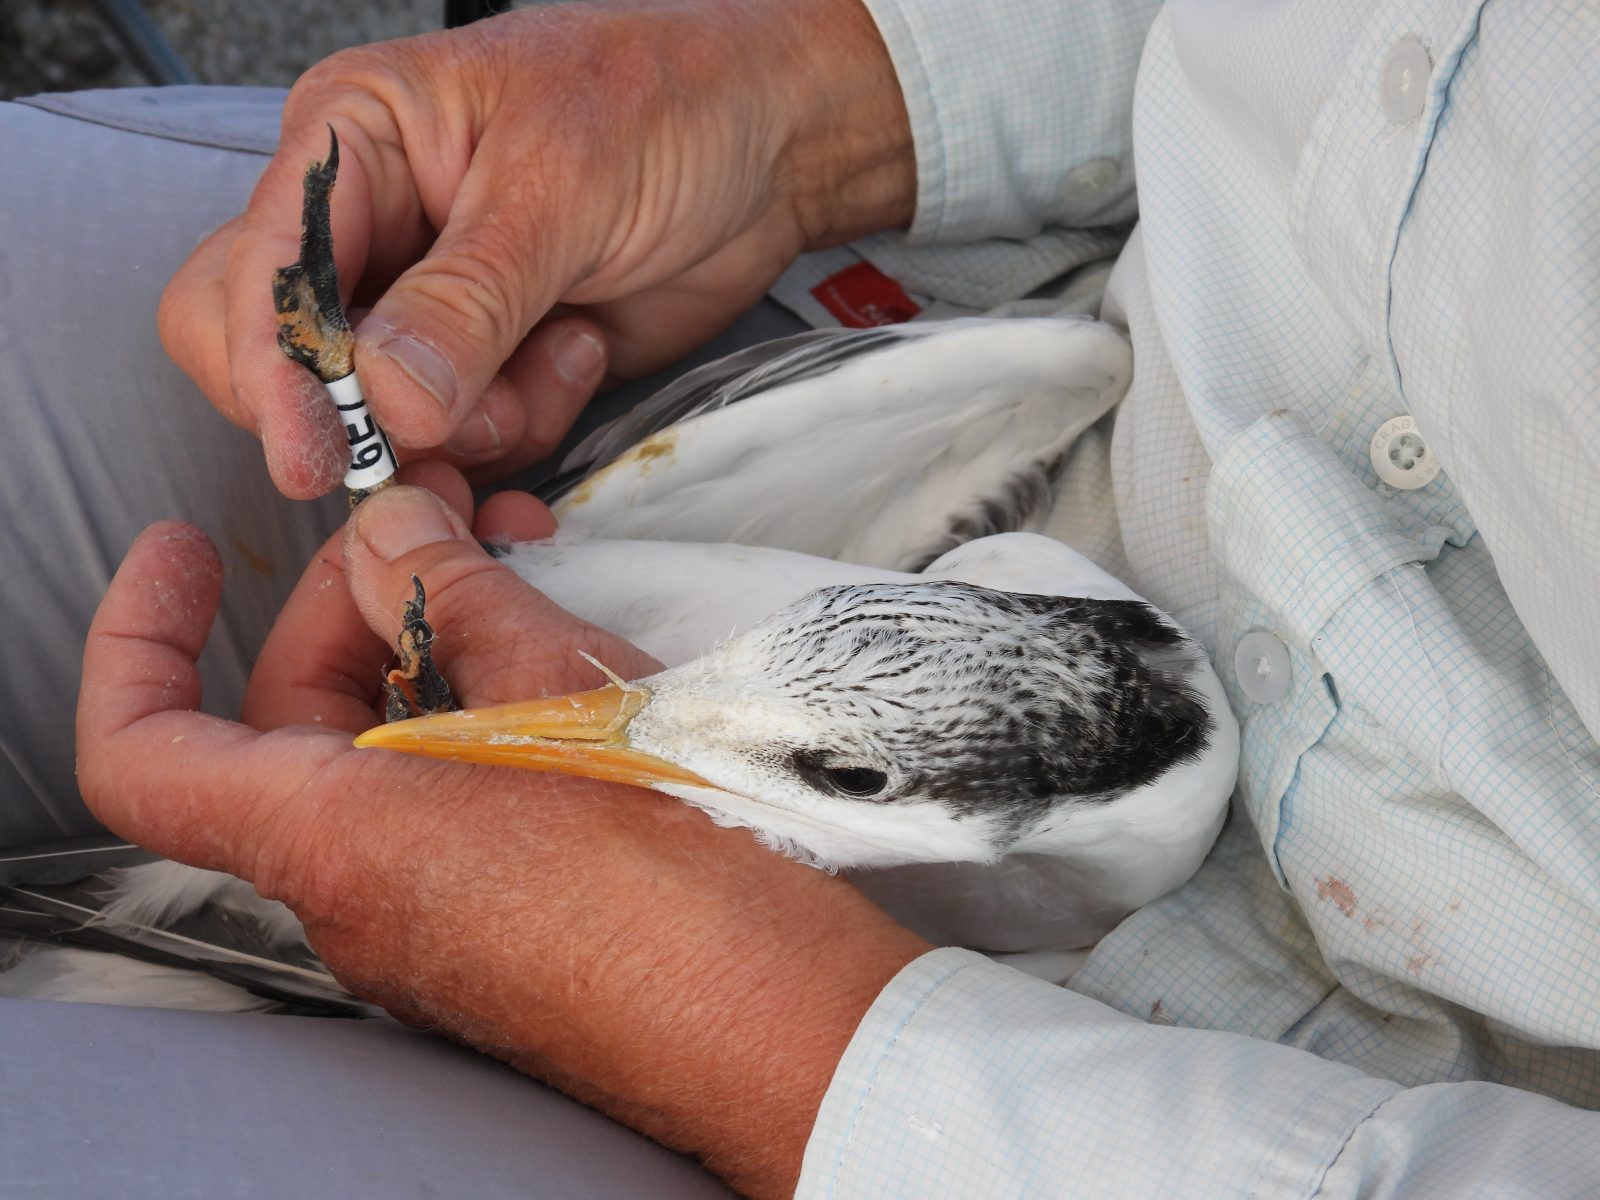 Royal tern chick in the process of having a band affixed to its leg. 